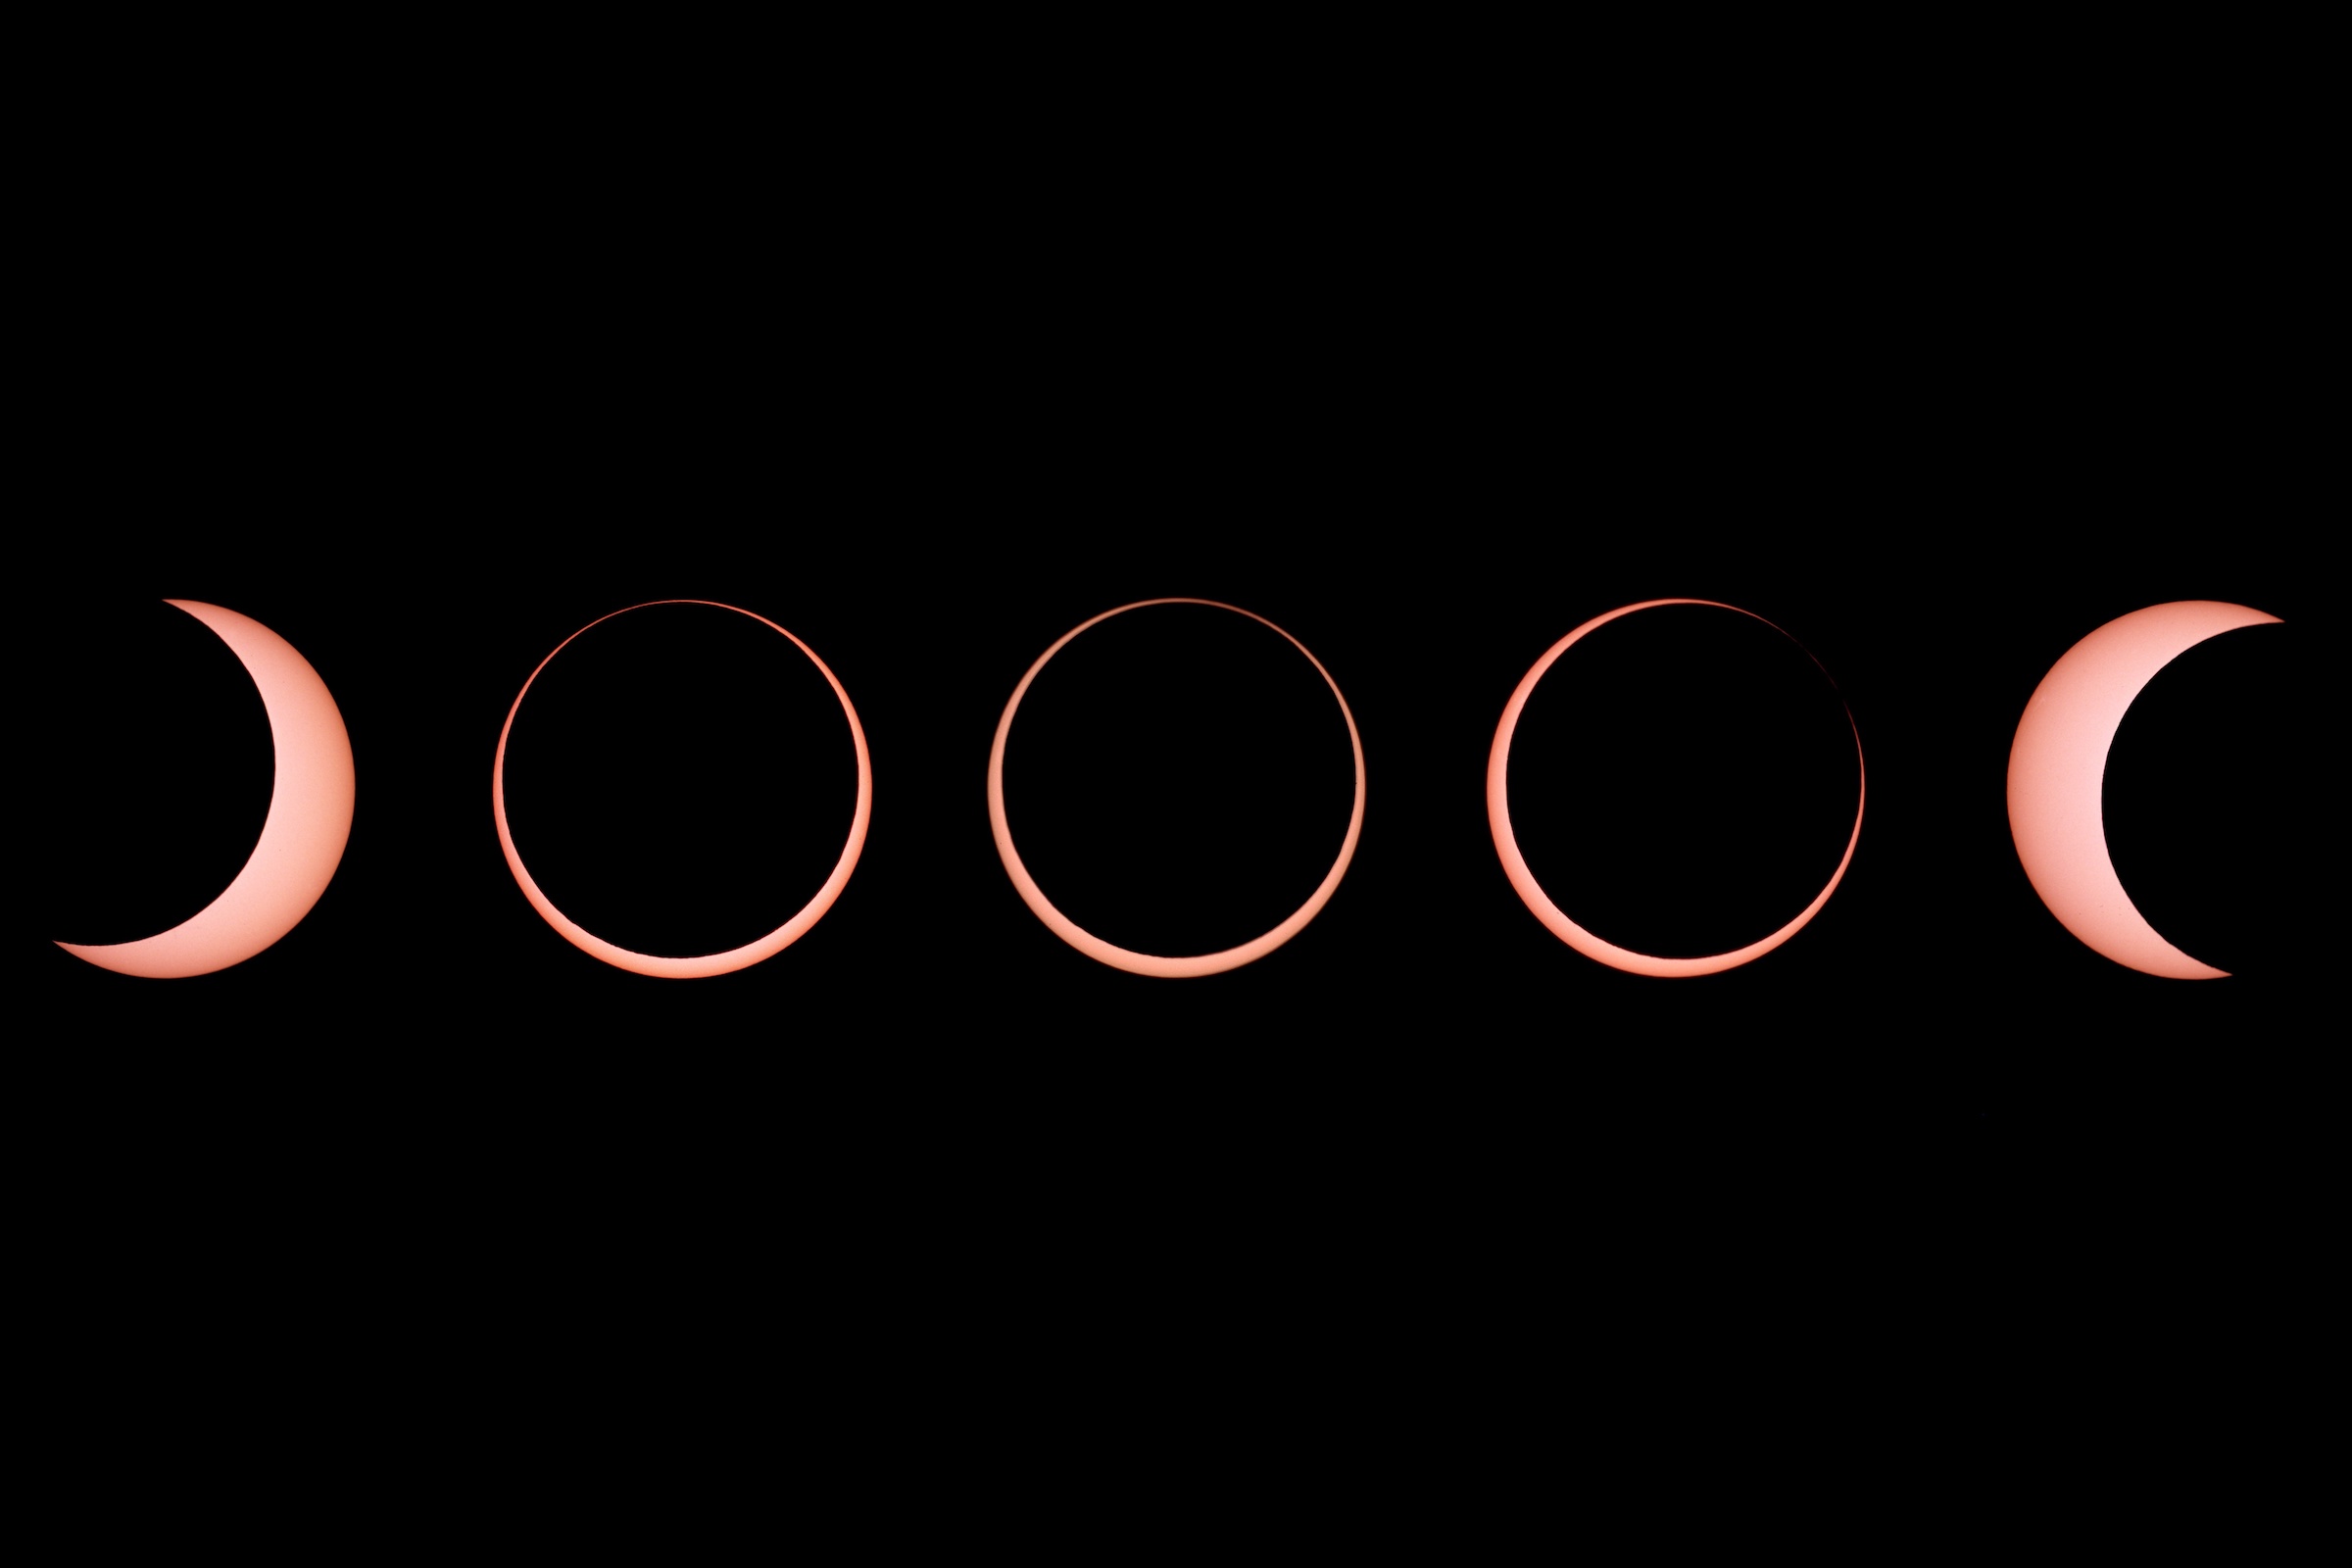 A solar eclipse is shown at five stages with the moon blocking out most of the sun and leaving a ring of light at its most extreme phase